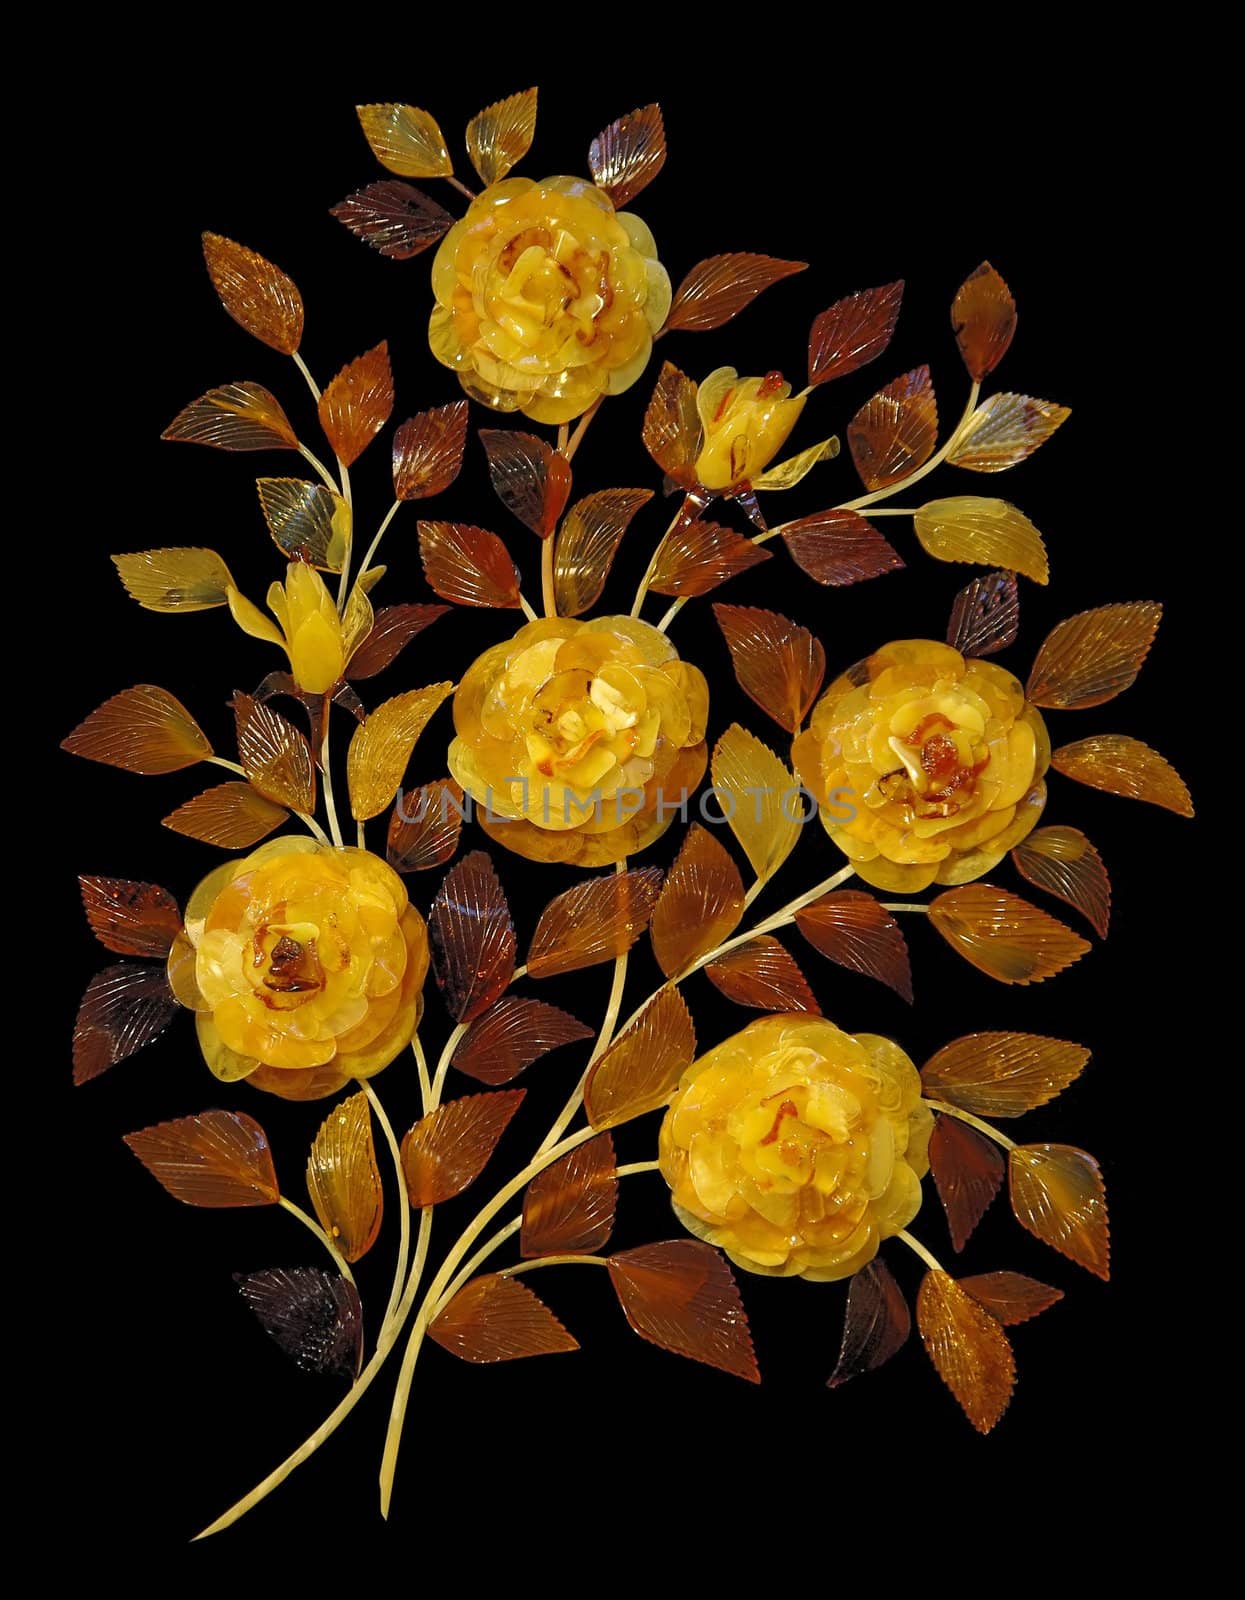 Bouquet of roses made of amber on black background